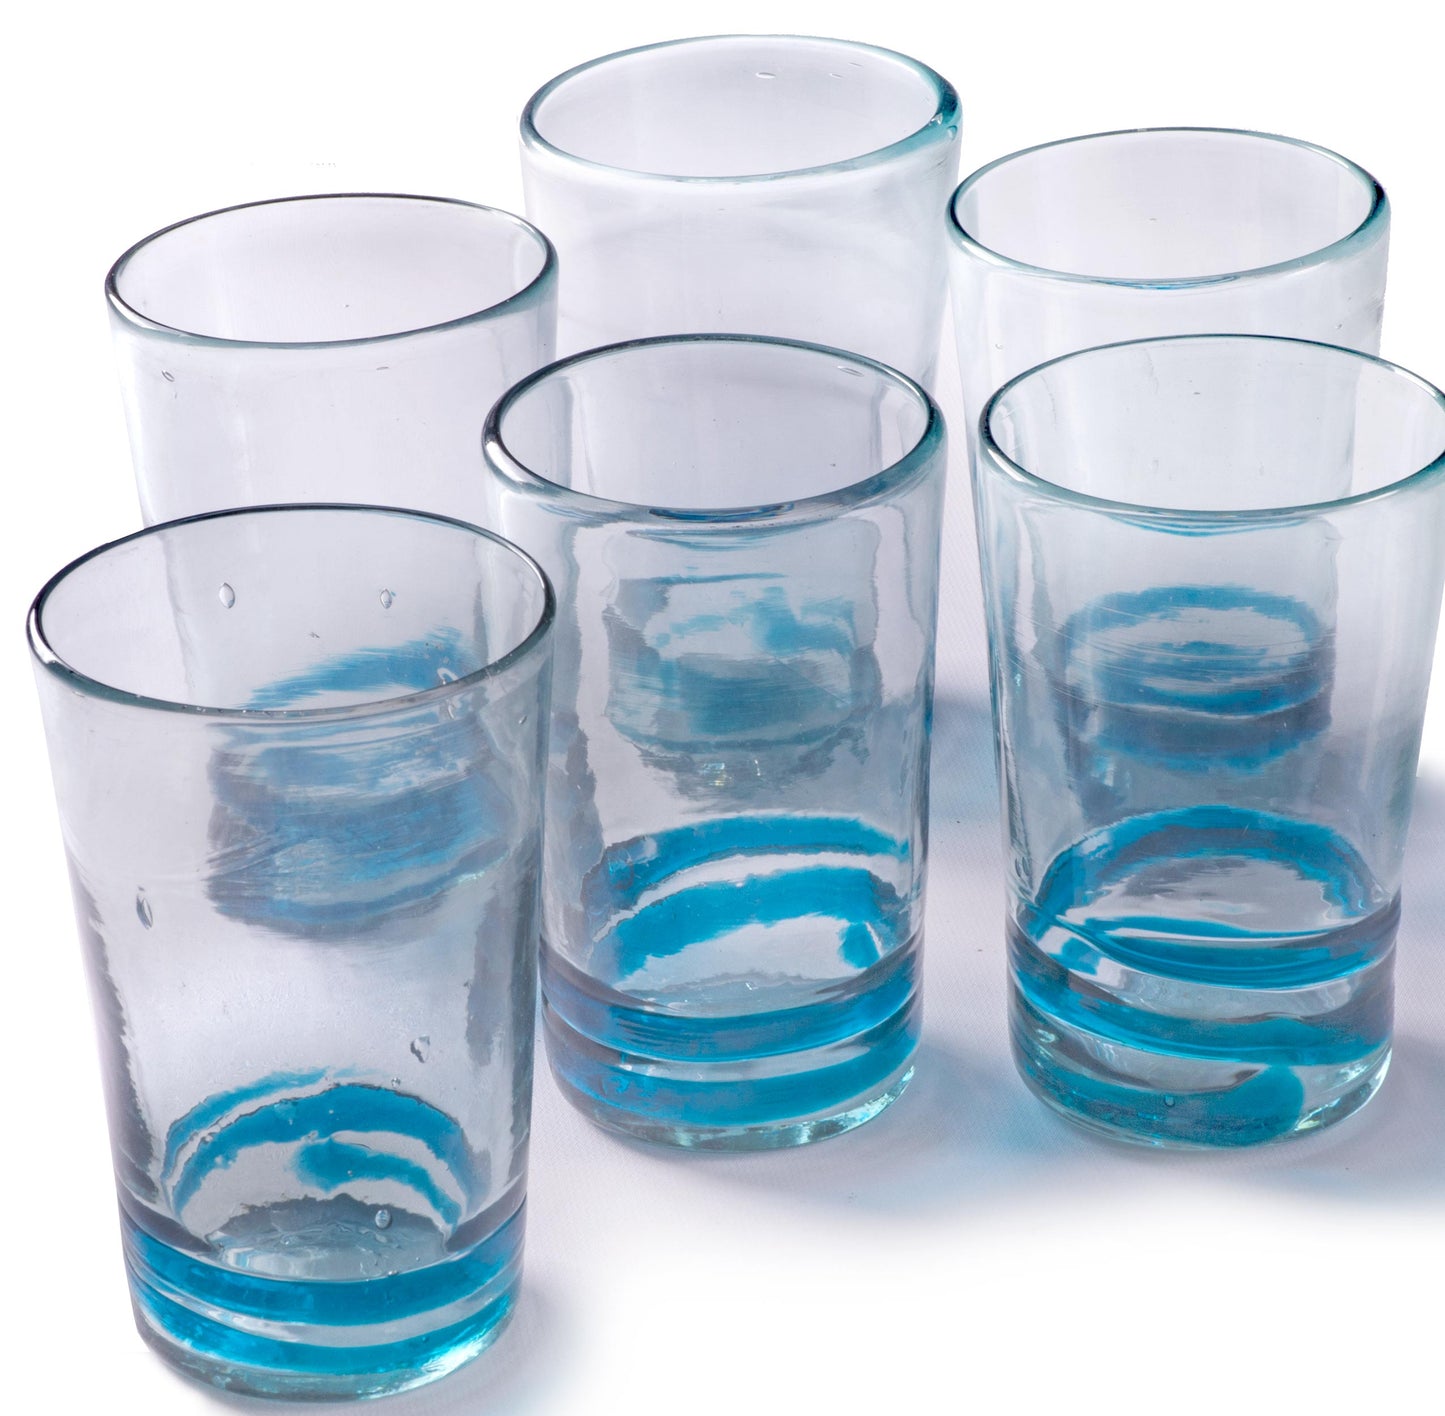 Serpentine Tall Tumbler in Turquoise - 18 oz - Set of 6 - Orion's Table 